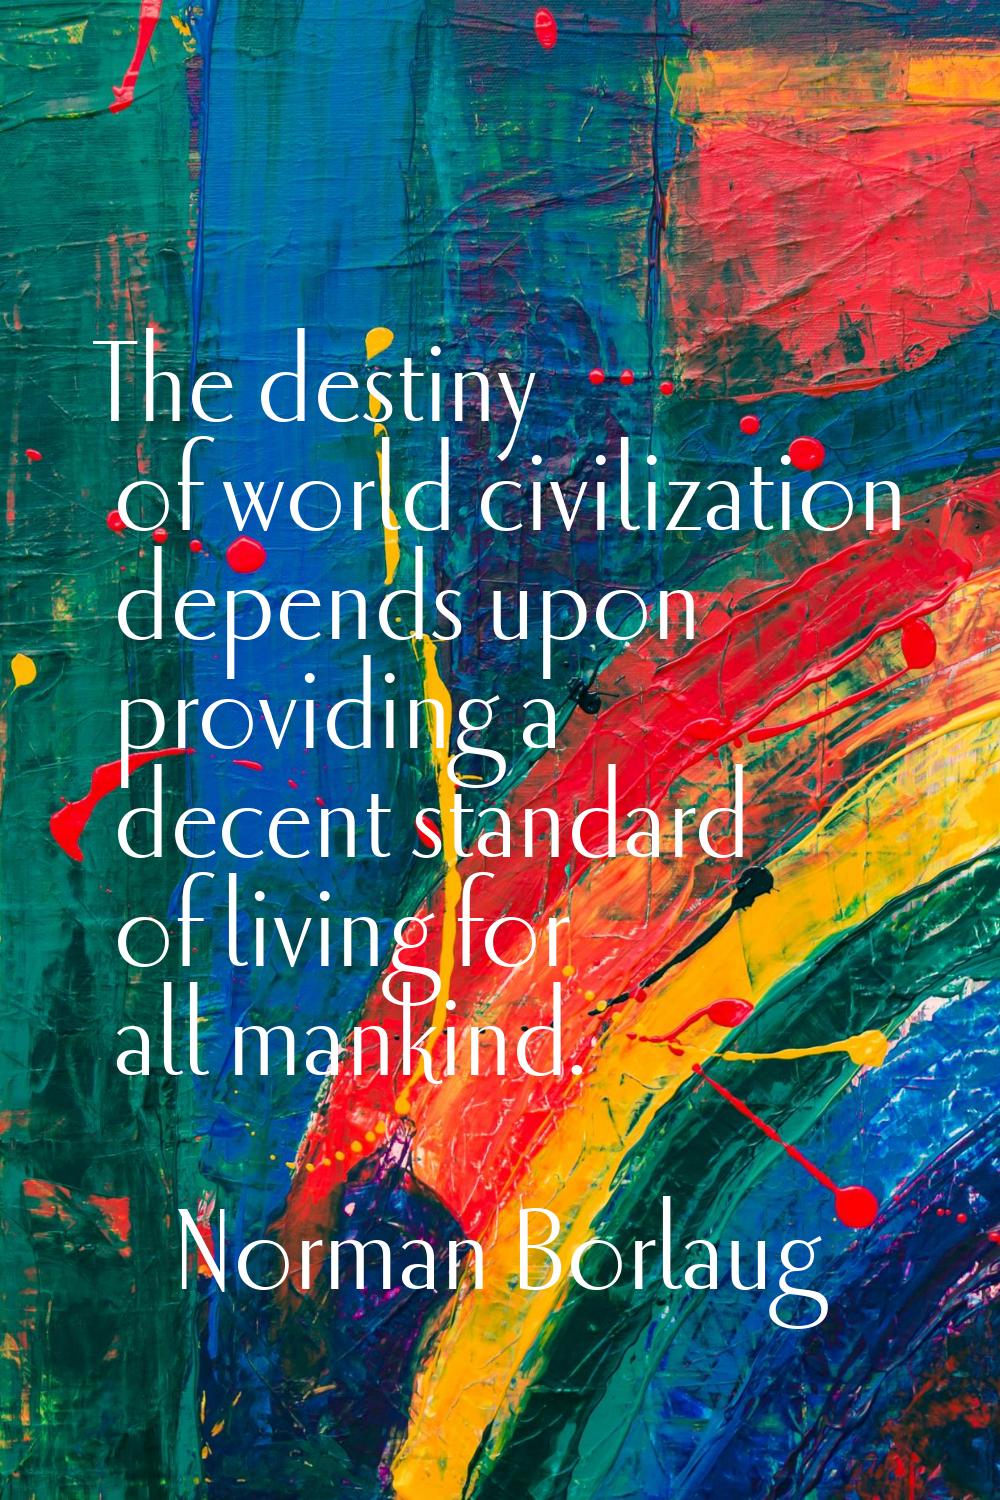 The destiny of world civilization depends upon providing a decent standard of living for all mankin